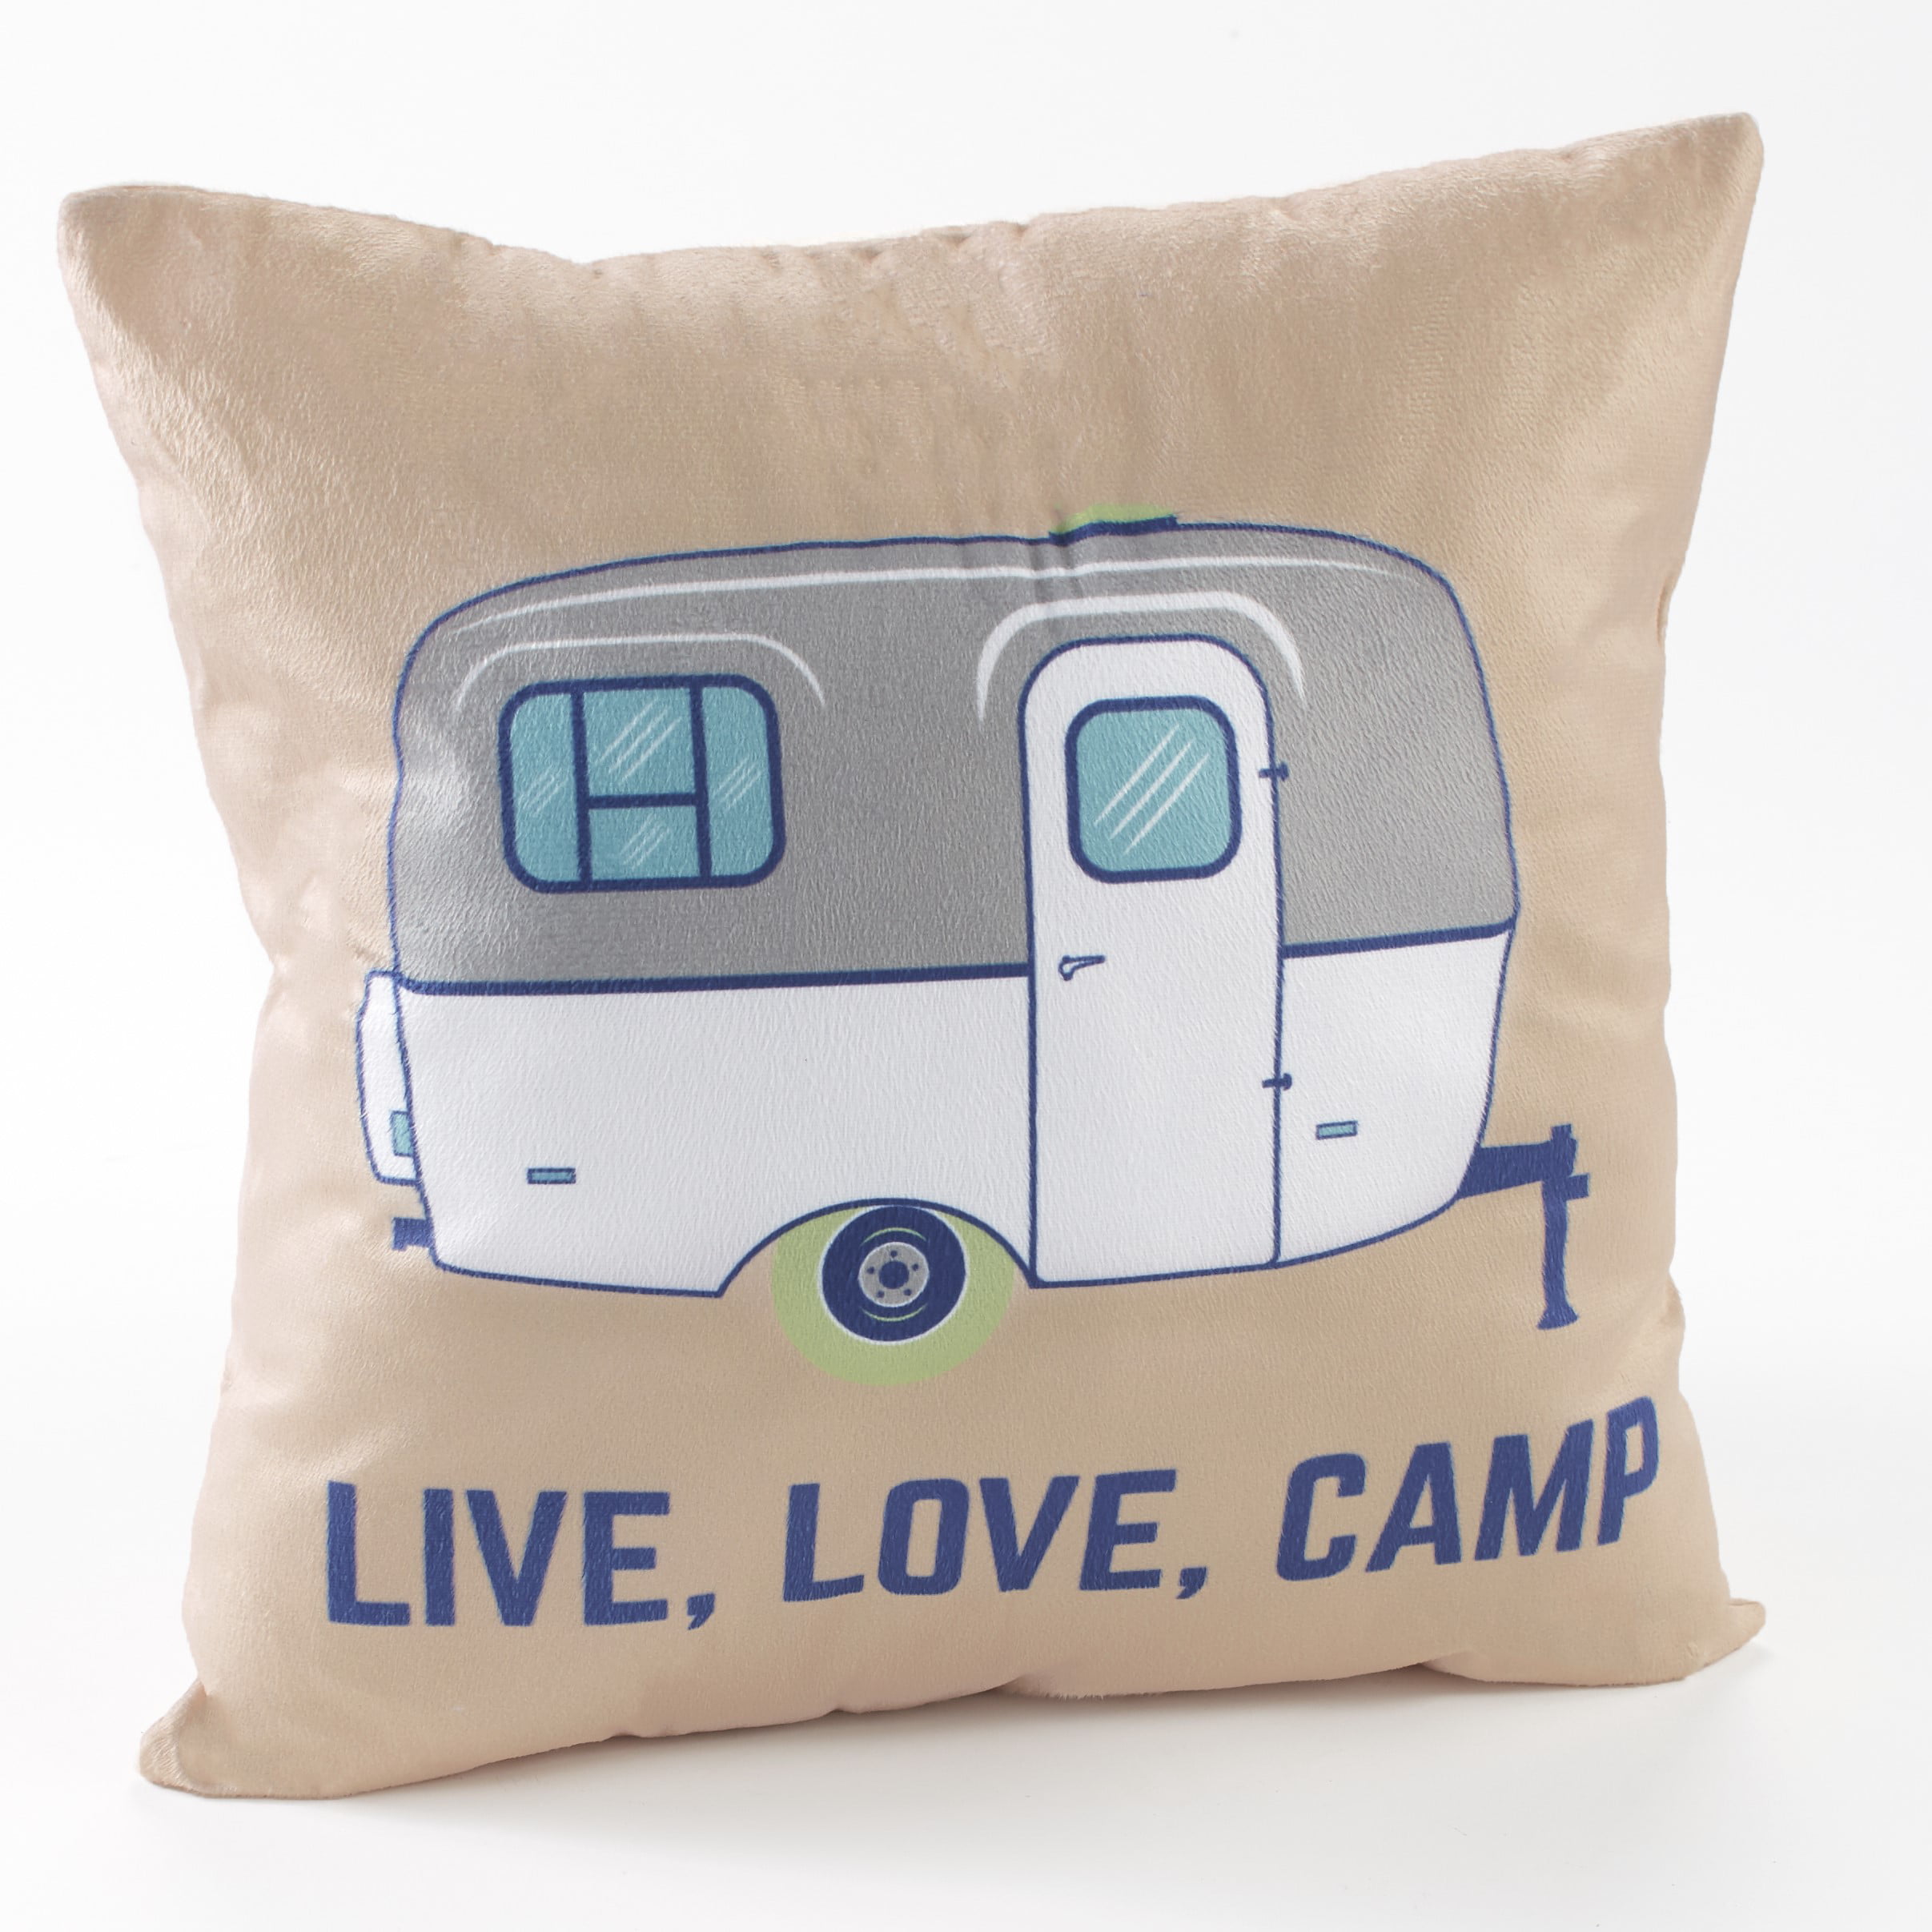 for Camper 18 x 18 Camping is My Favorite Therapy Arundeal Decorative Throw Pillow Case Covers